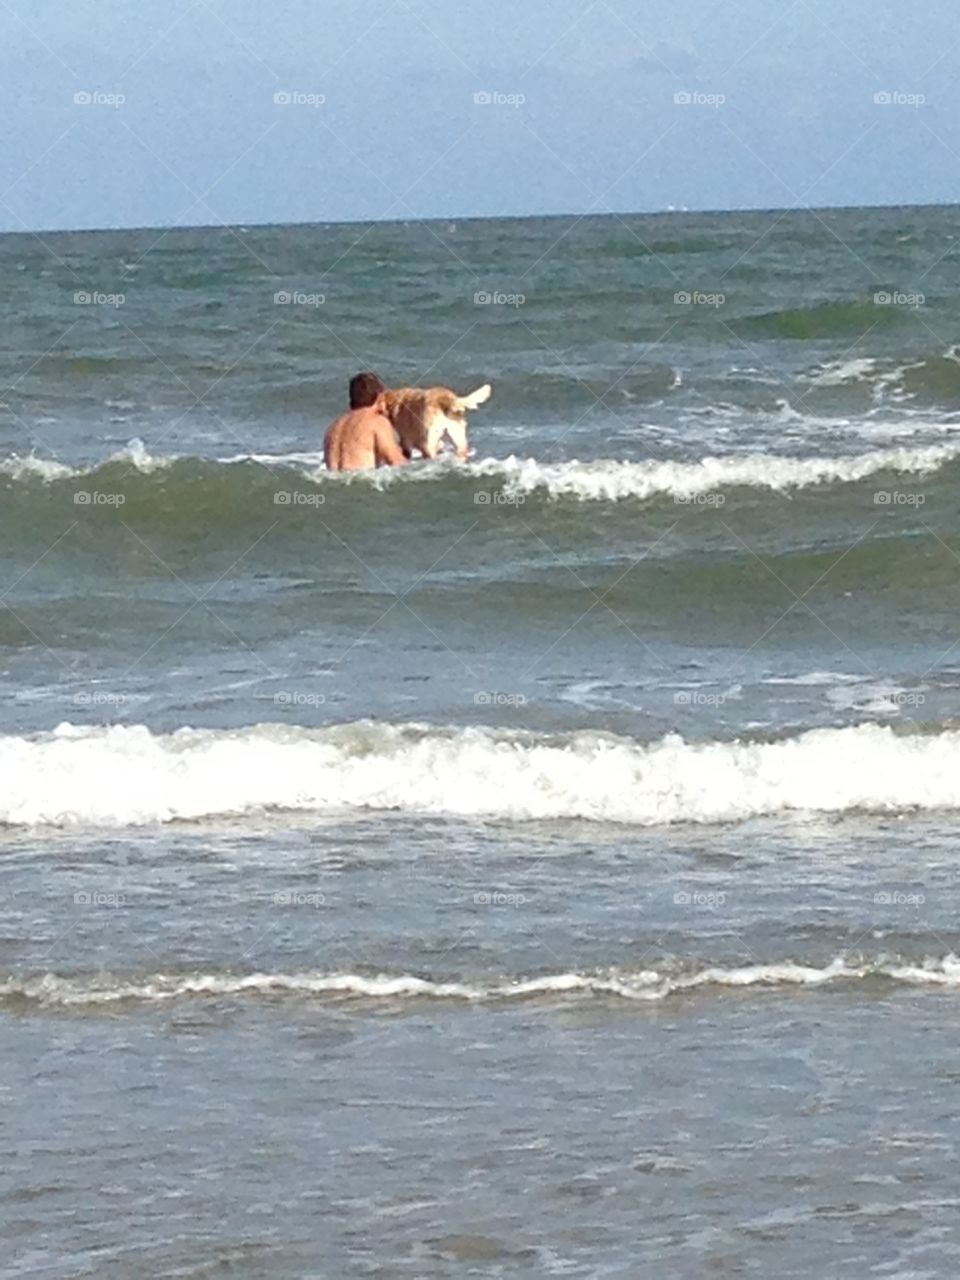 A man taking his dog out for another ride on the surfboard